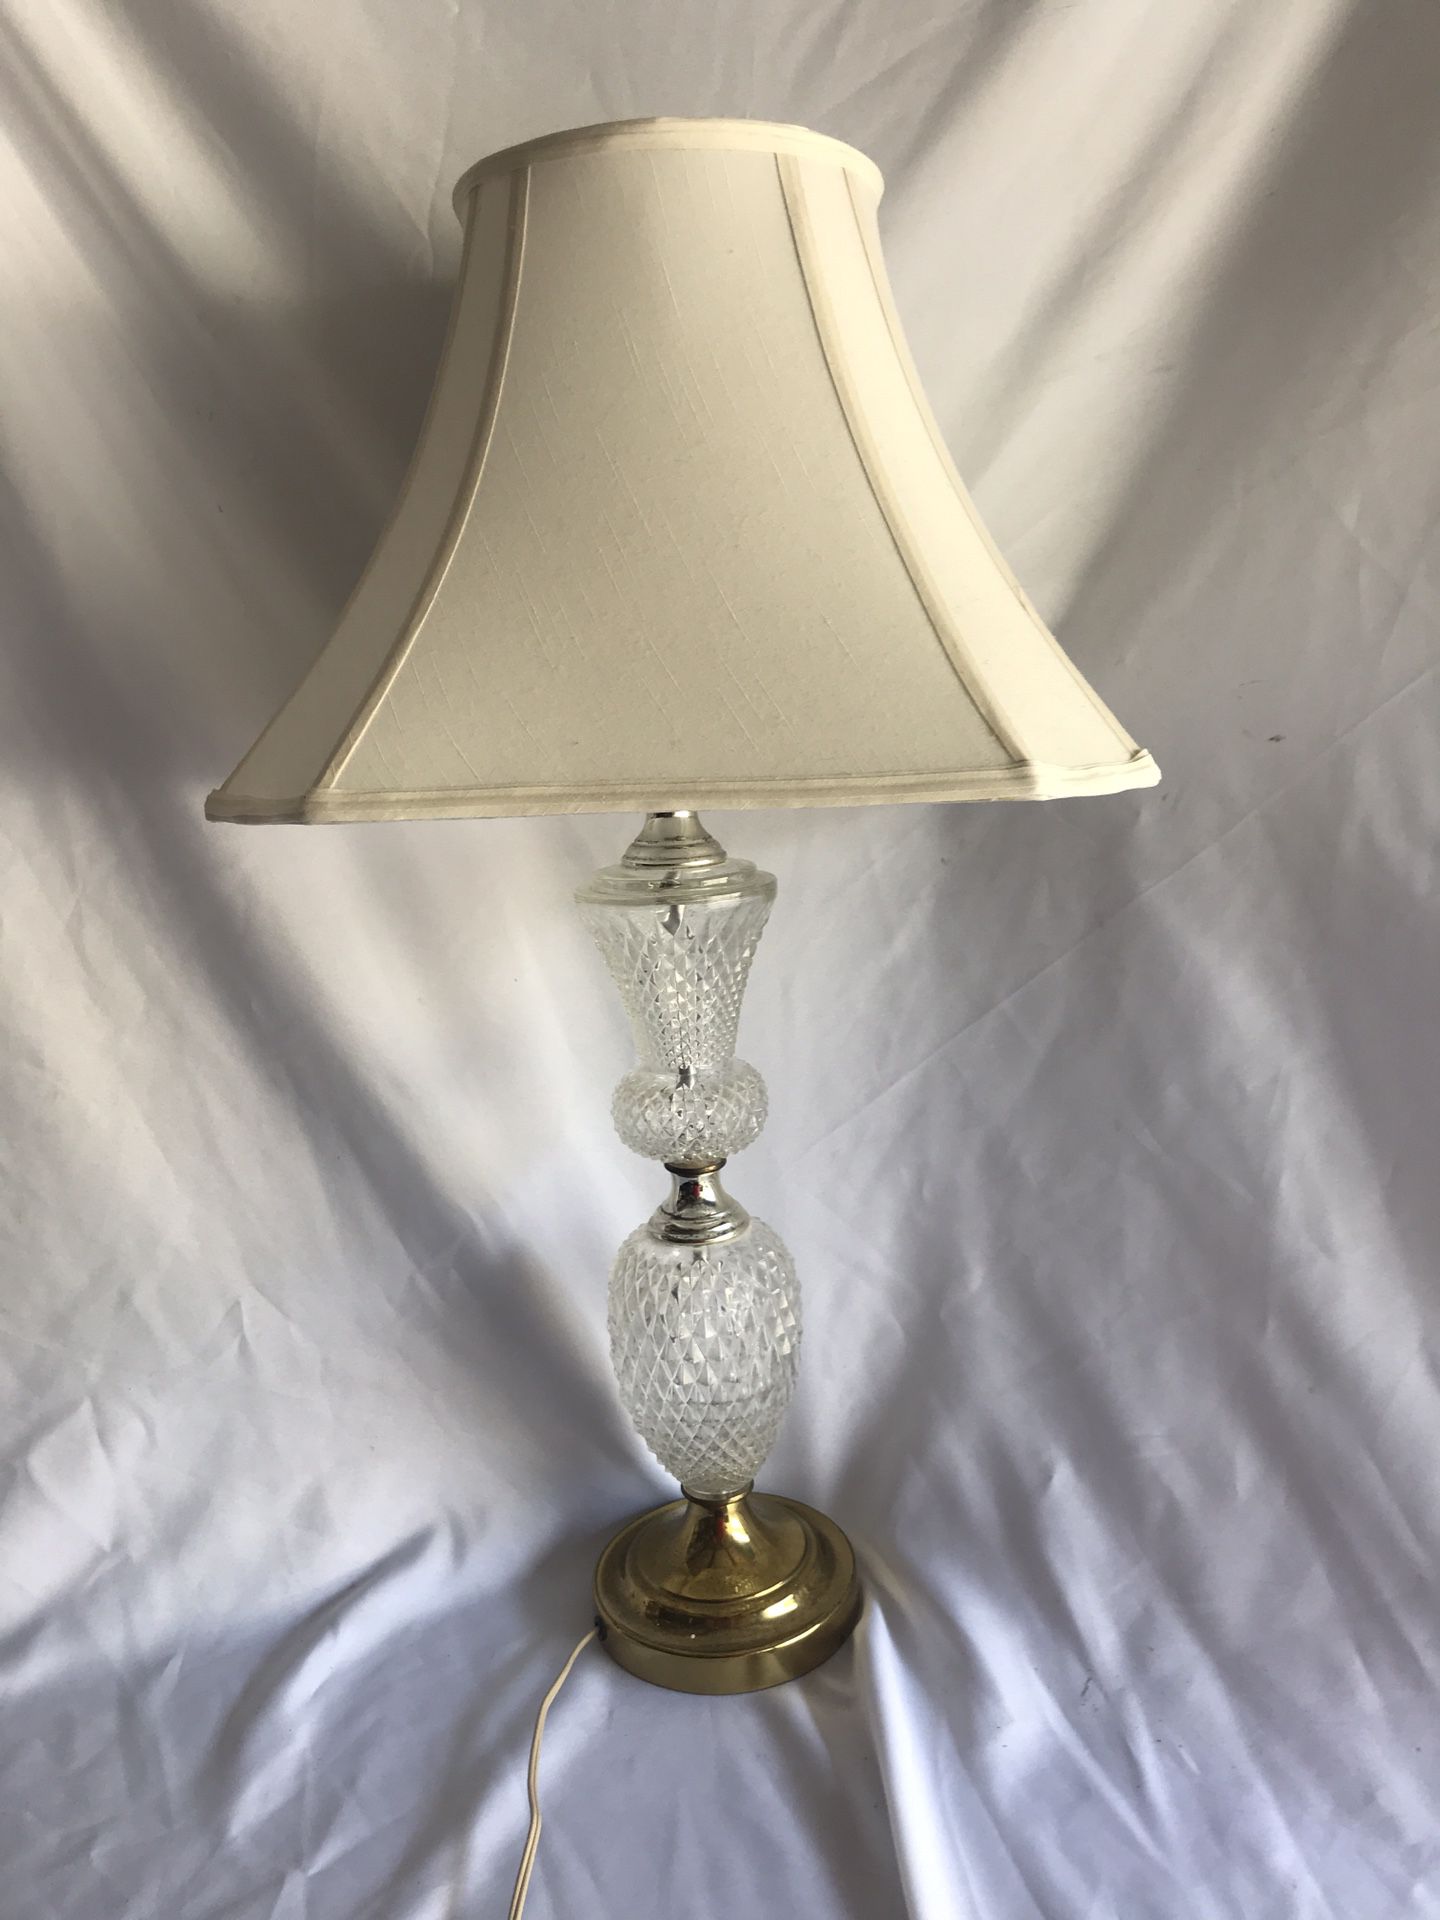 Vintage Glass Lamp with square shade